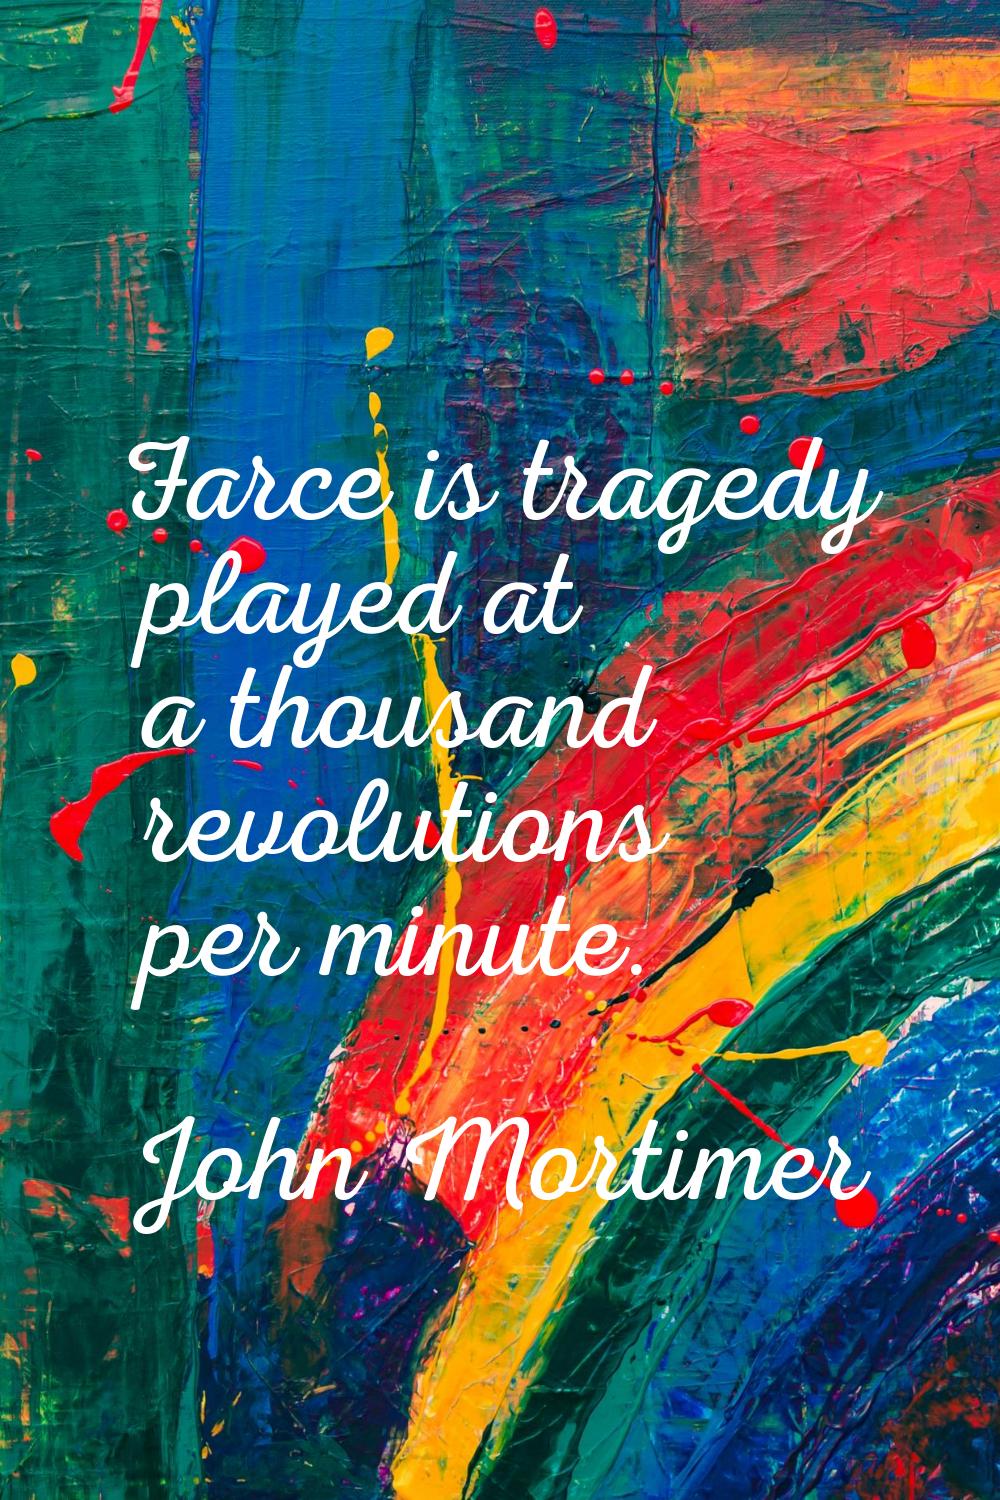 Farce is tragedy played at a thousand revolutions per minute.